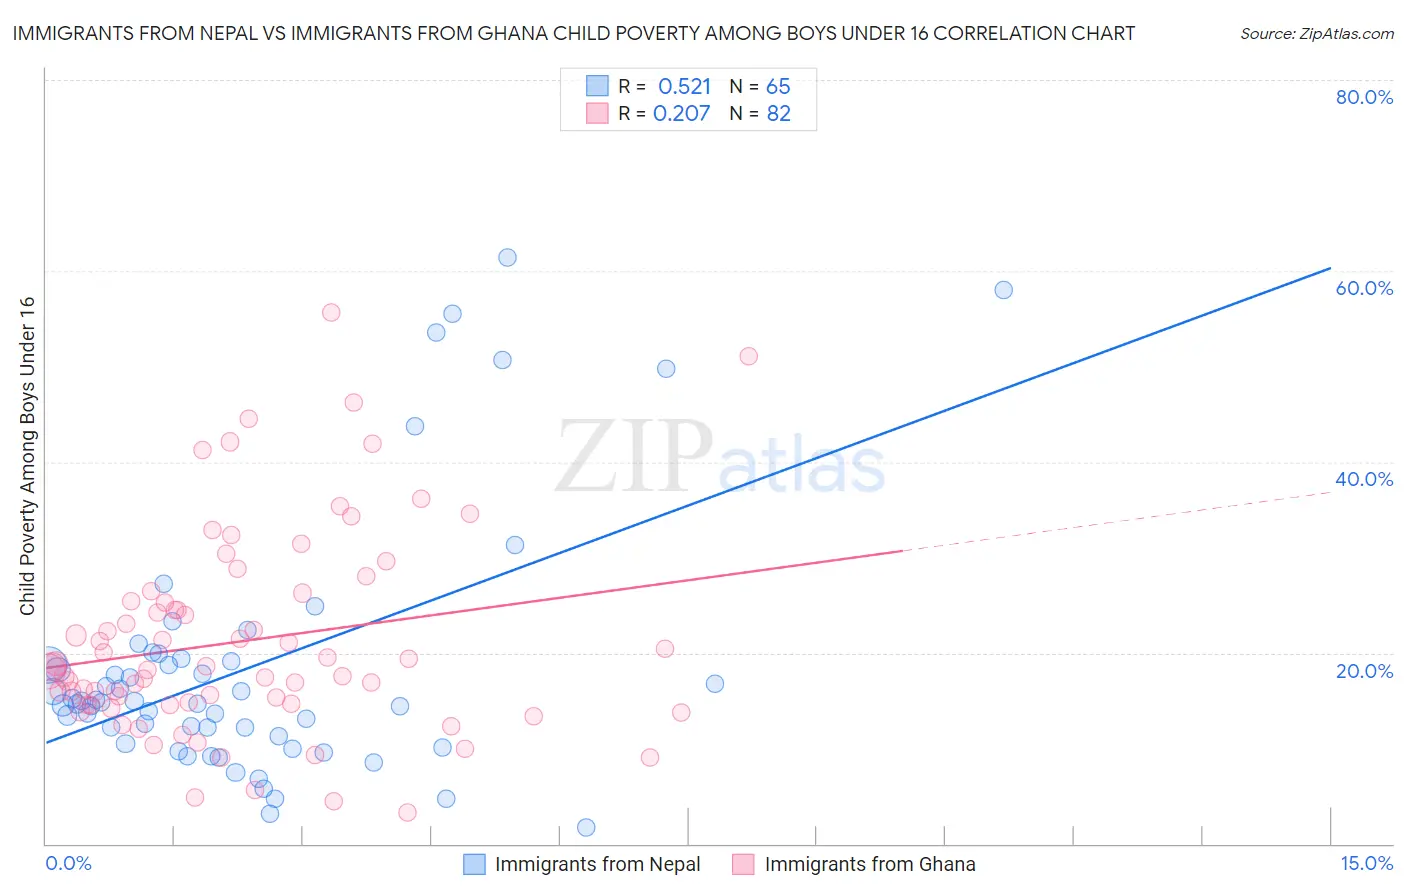 Immigrants from Nepal vs Immigrants from Ghana Child Poverty Among Boys Under 16